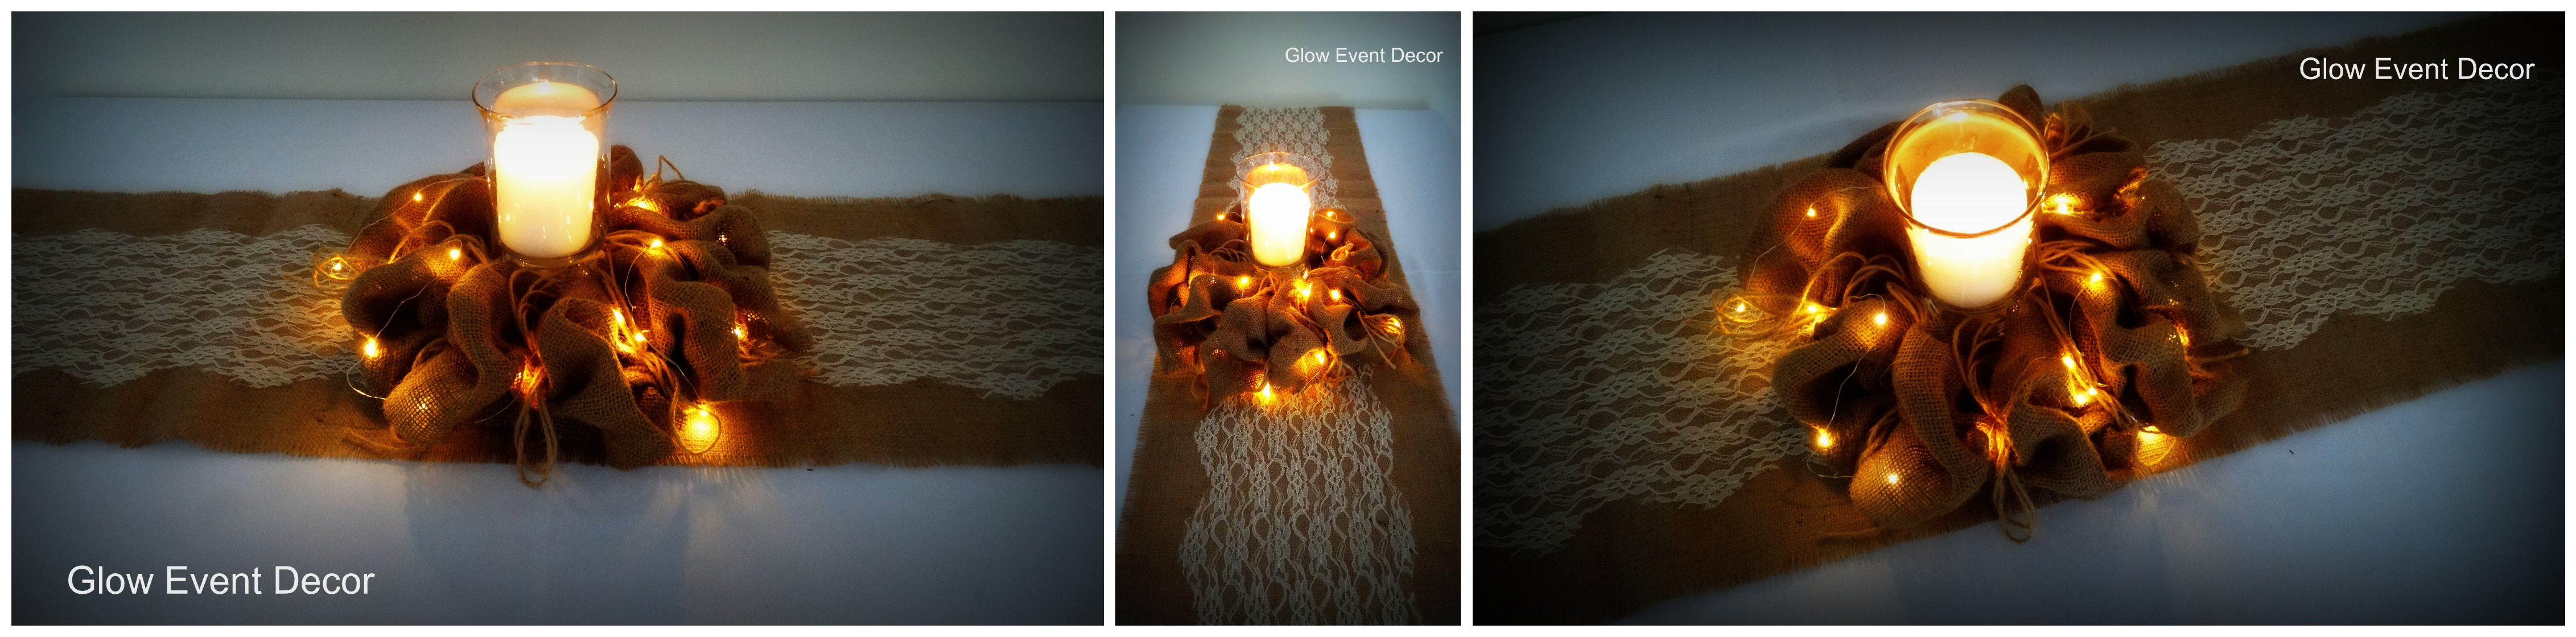 Hessian and lace table runner decoration hessian wreath LED fairy light centrepiece for hire from glow event decor